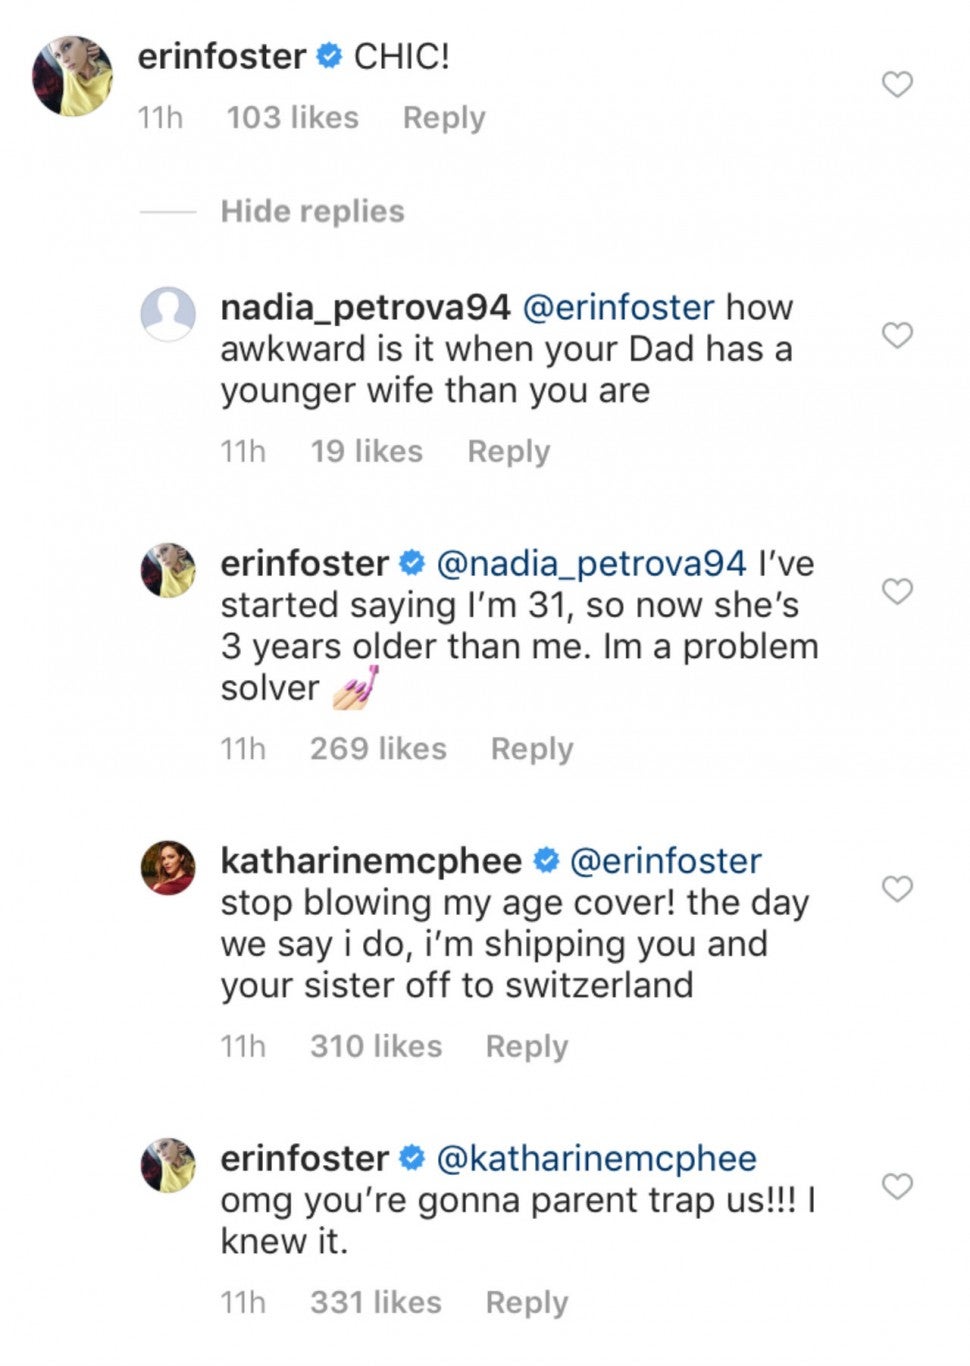 Erin Foster comments